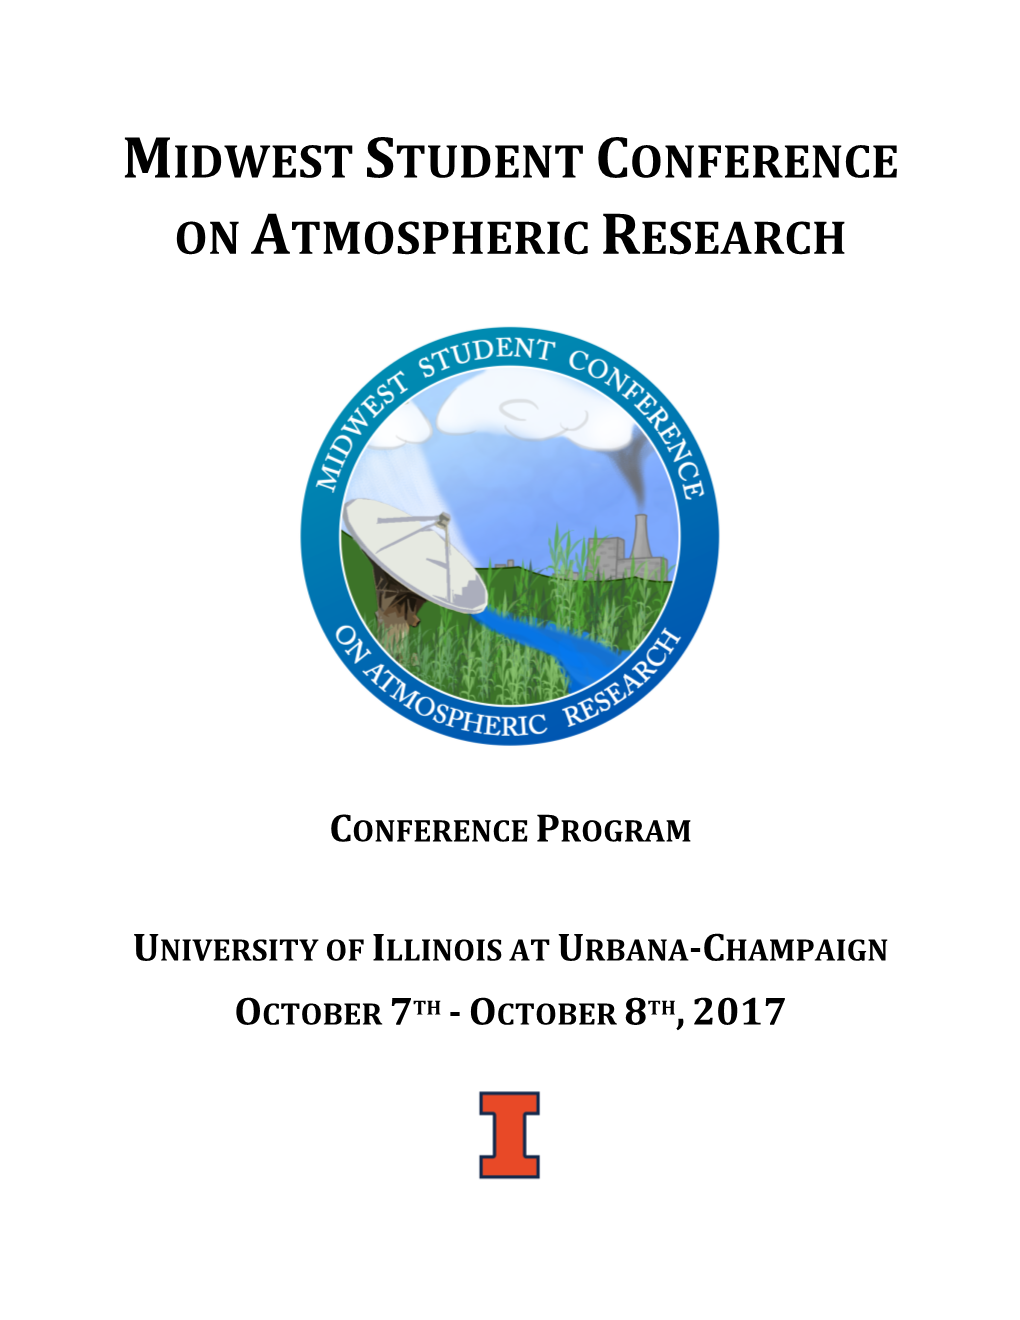 Midwest Student Conference on Atmospheric Research